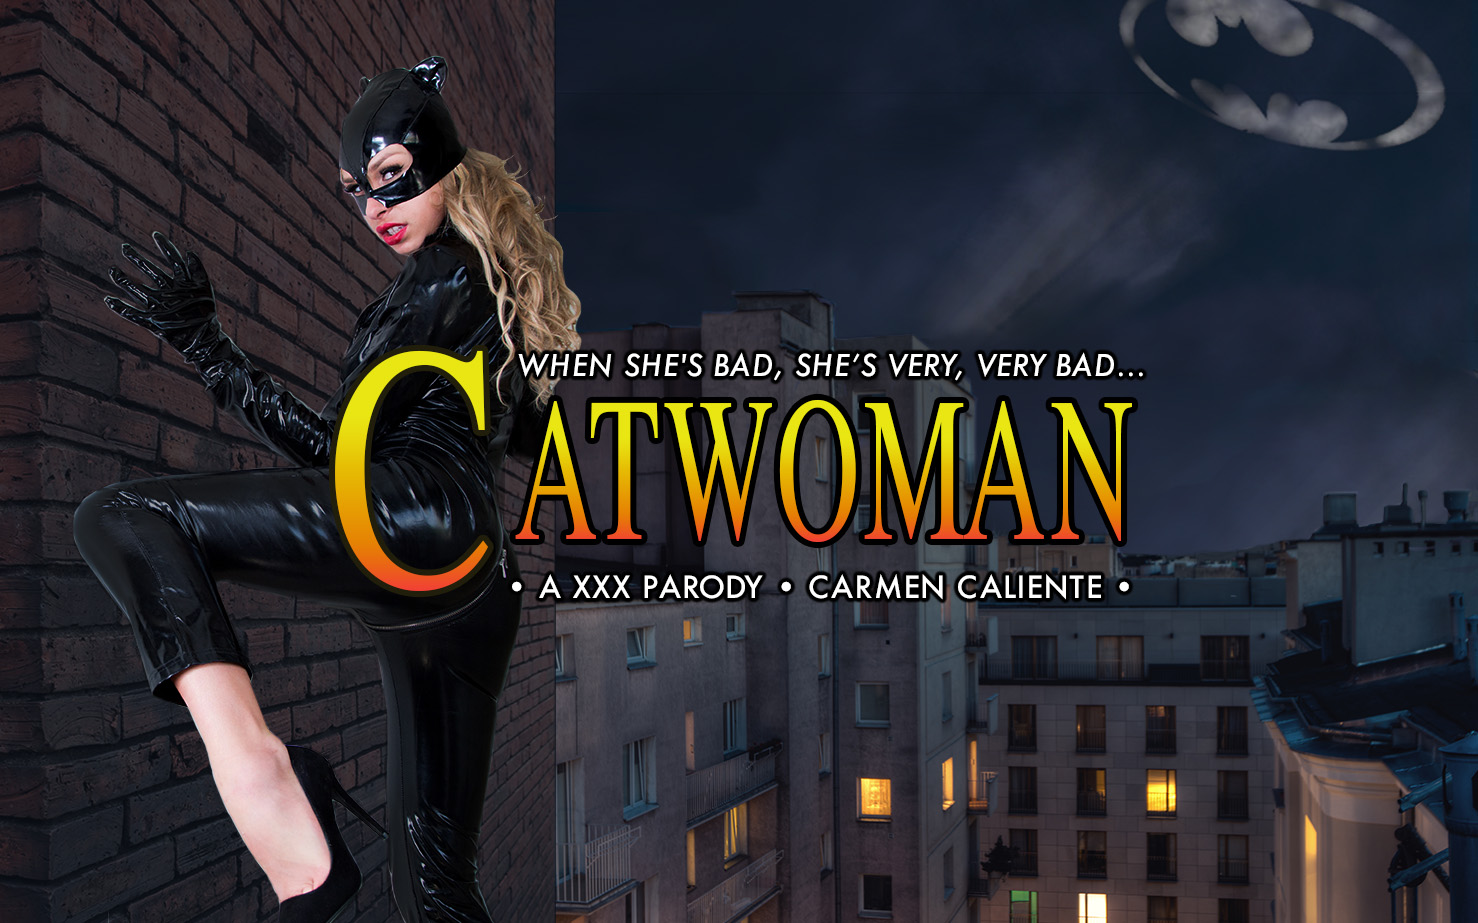 best of Carmen featuring catwoman cosplay